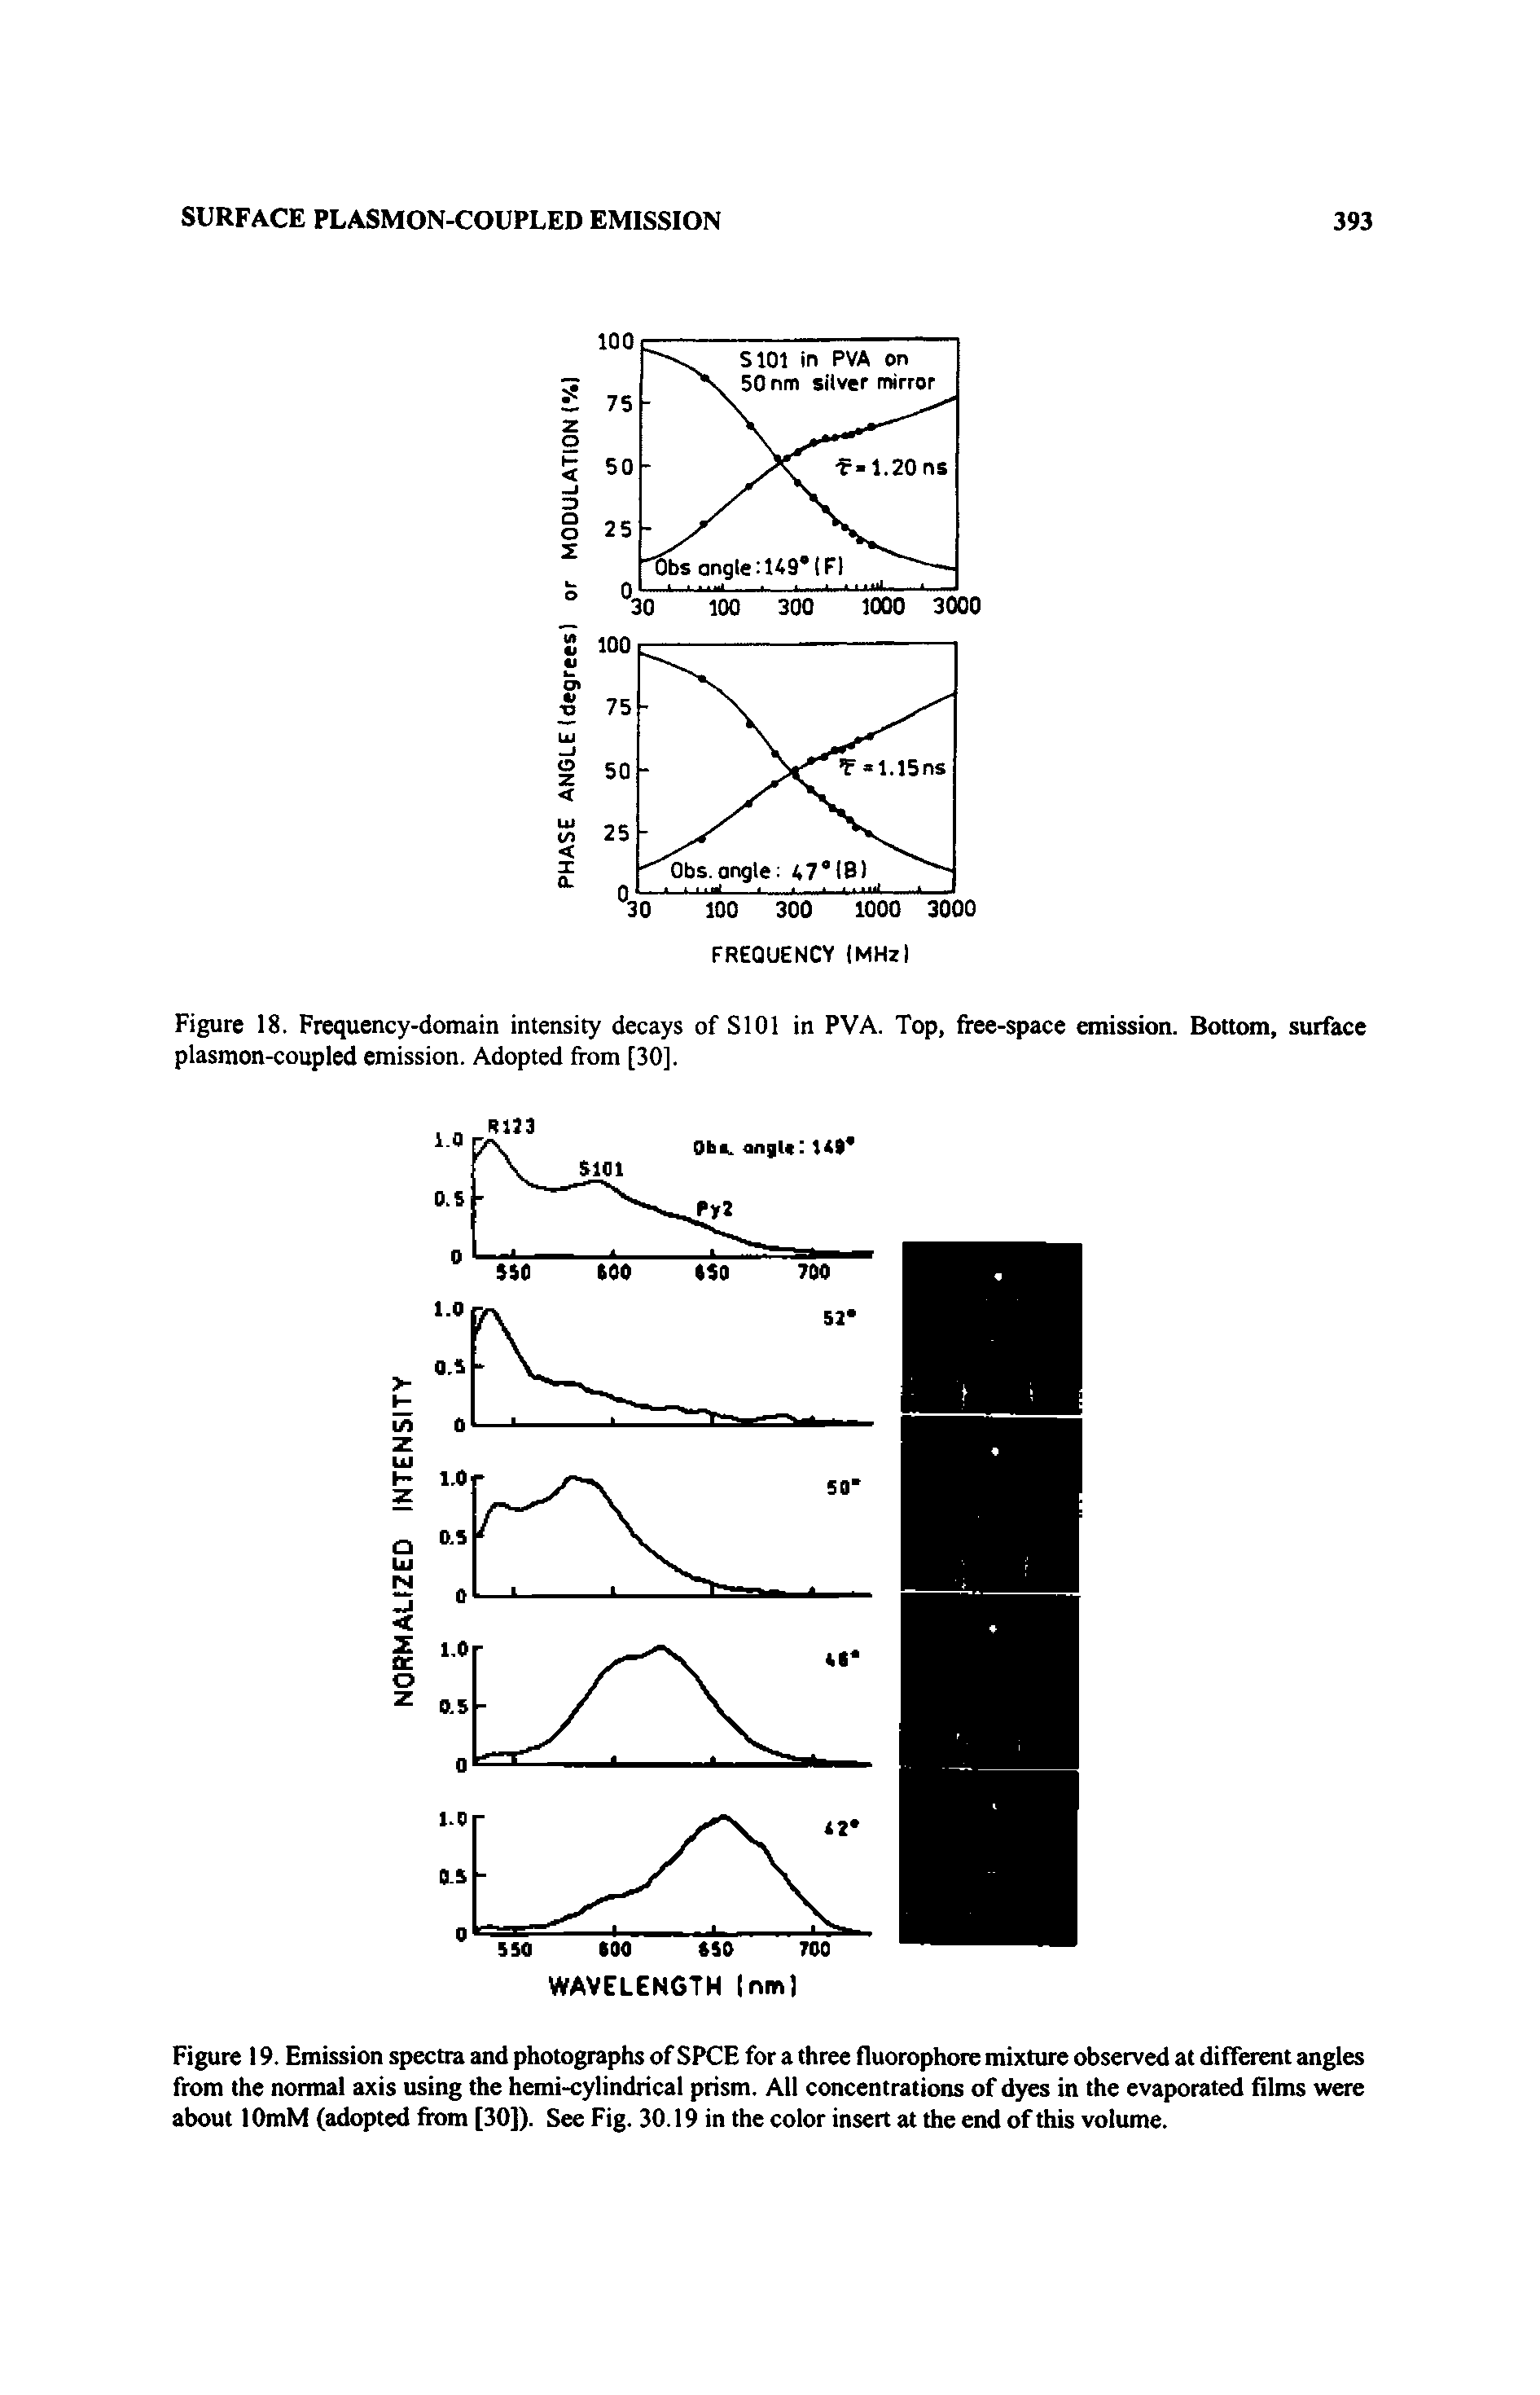 Figure 18. Frequency-domain intensity decays of SlOl in PVA. Top, free-space emission. Bottom, surface plasmon-coupled emission. Adopted from [30].